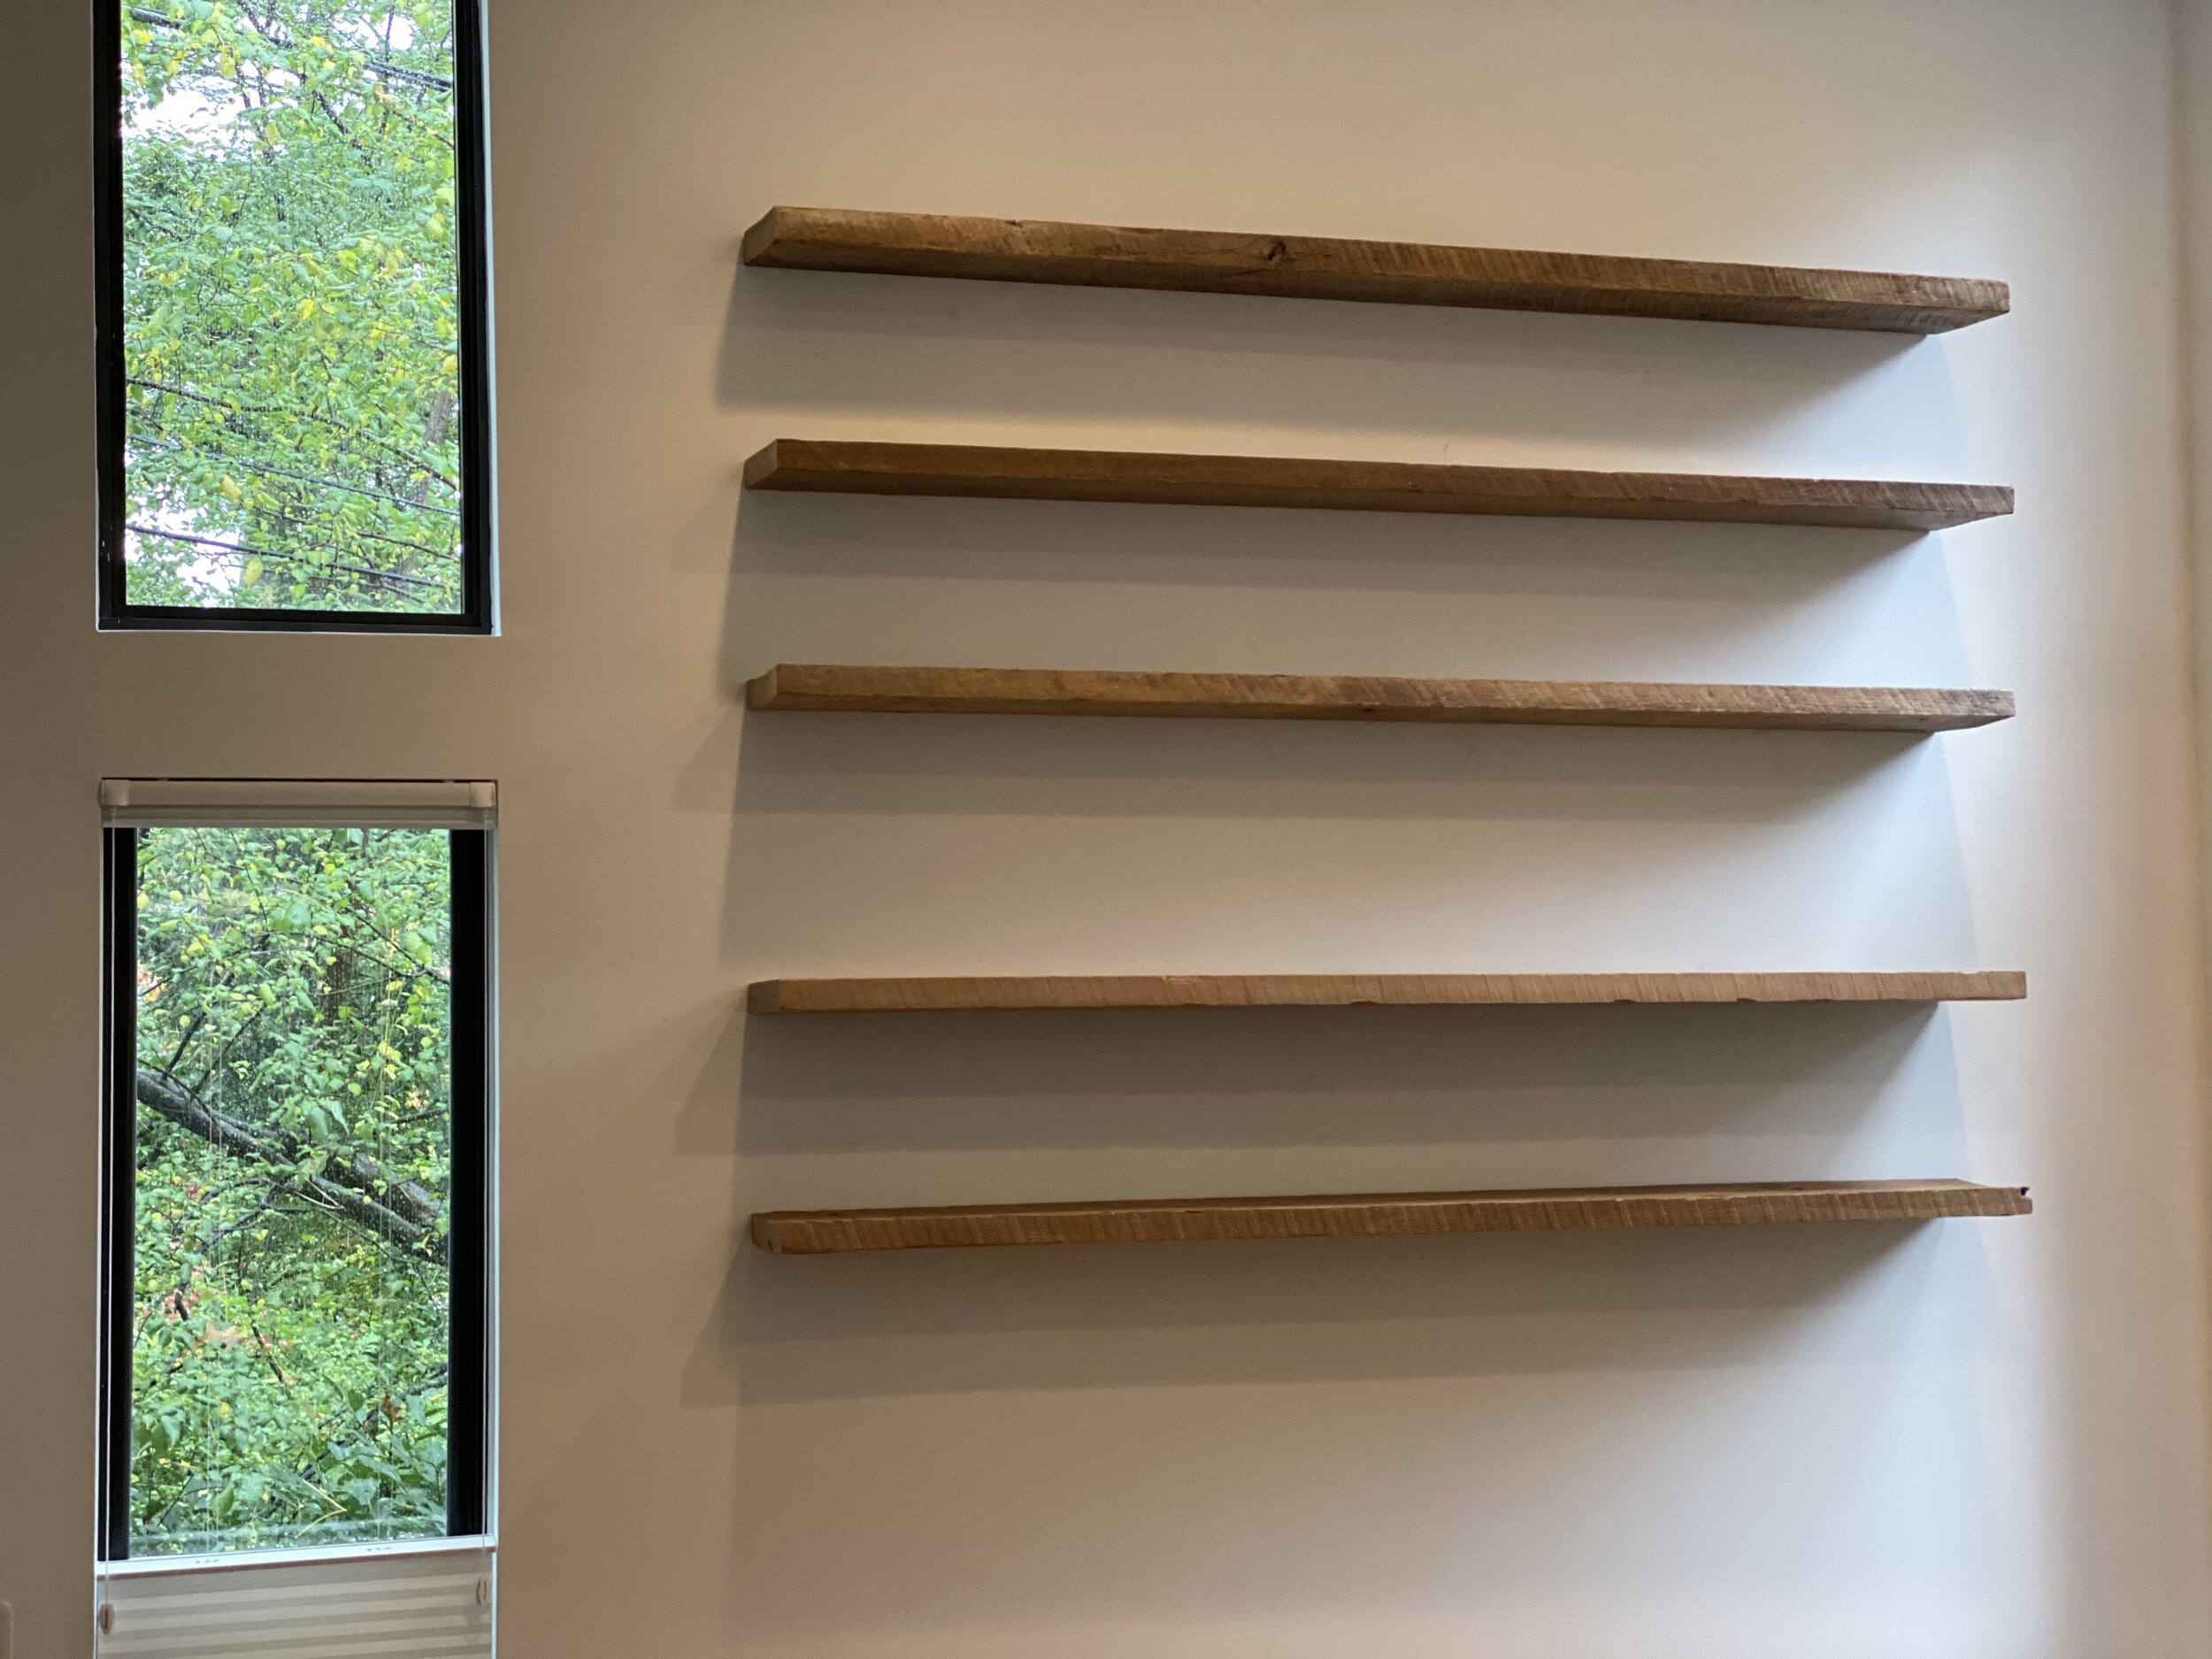 Why Solid Wood Floating Shelves, How To Build Free Floating Shelves